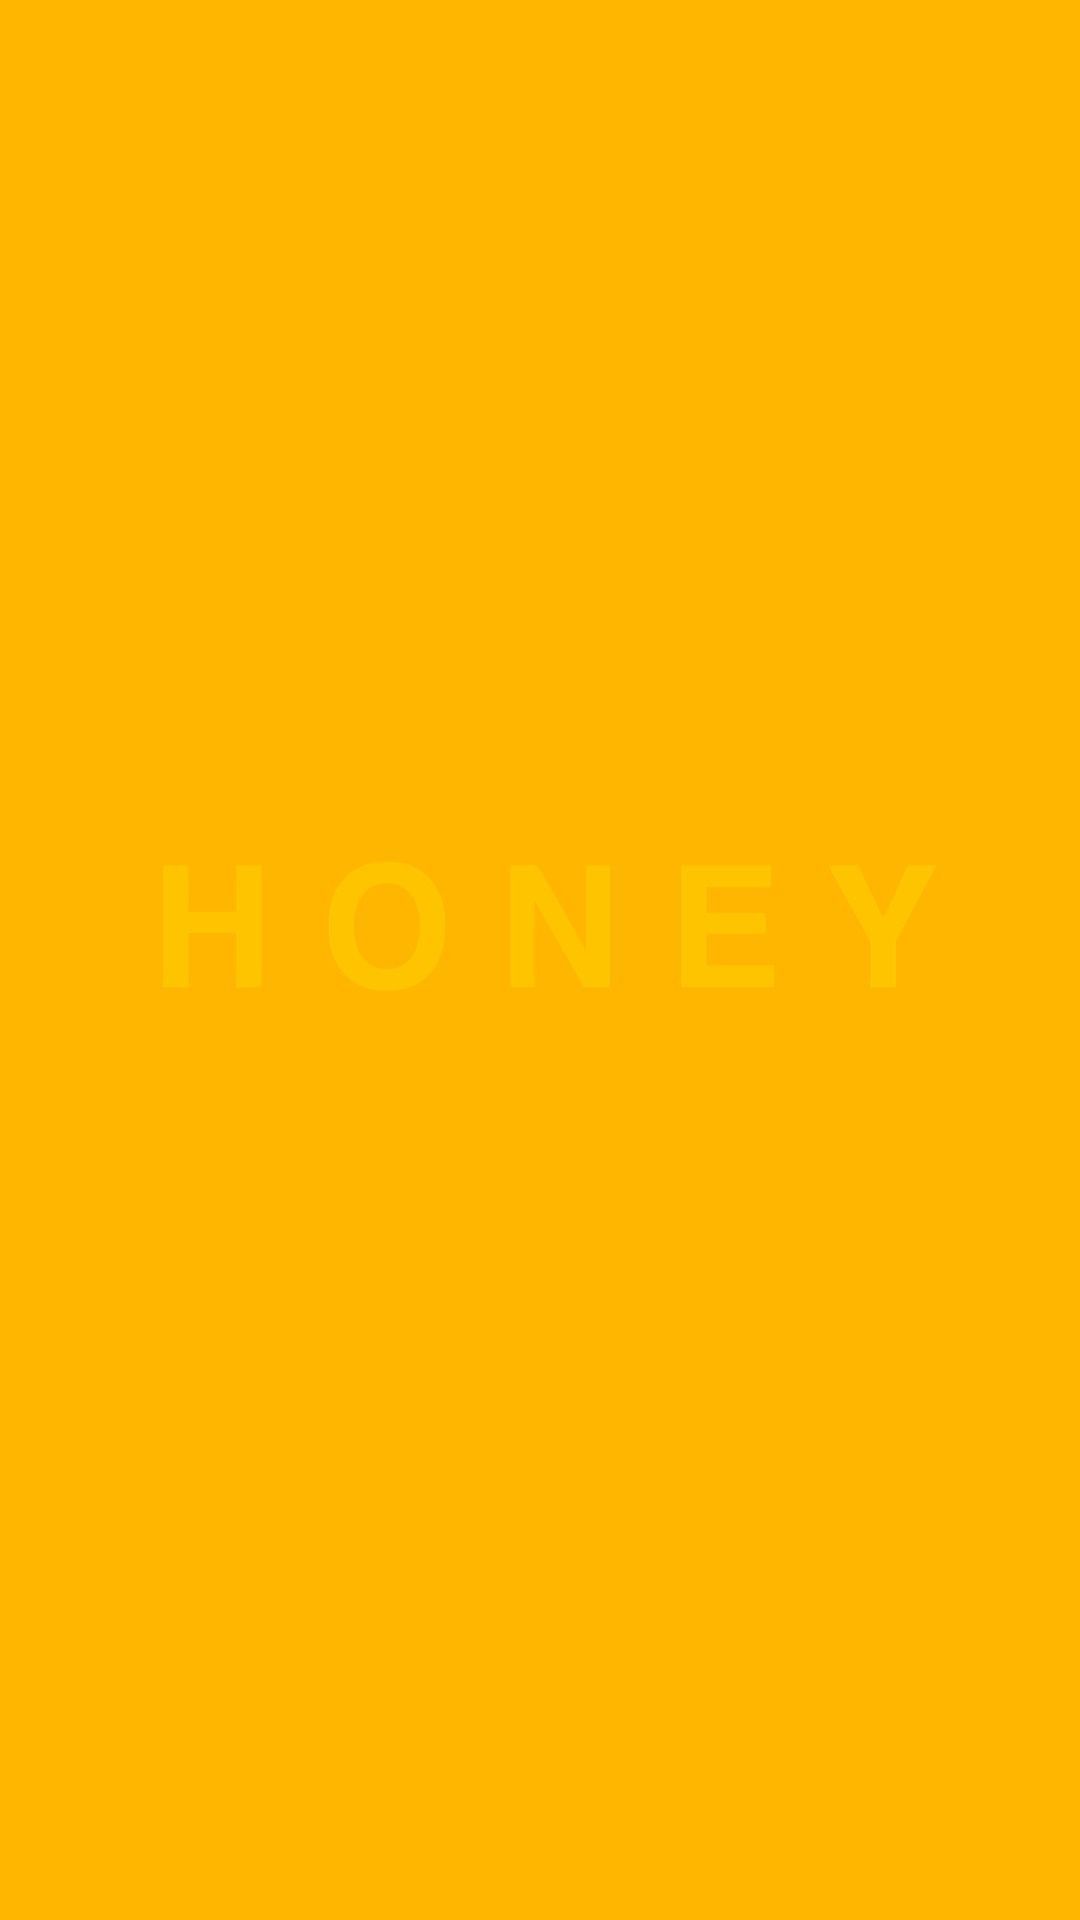 The honey logo on a yellow background - Yellow